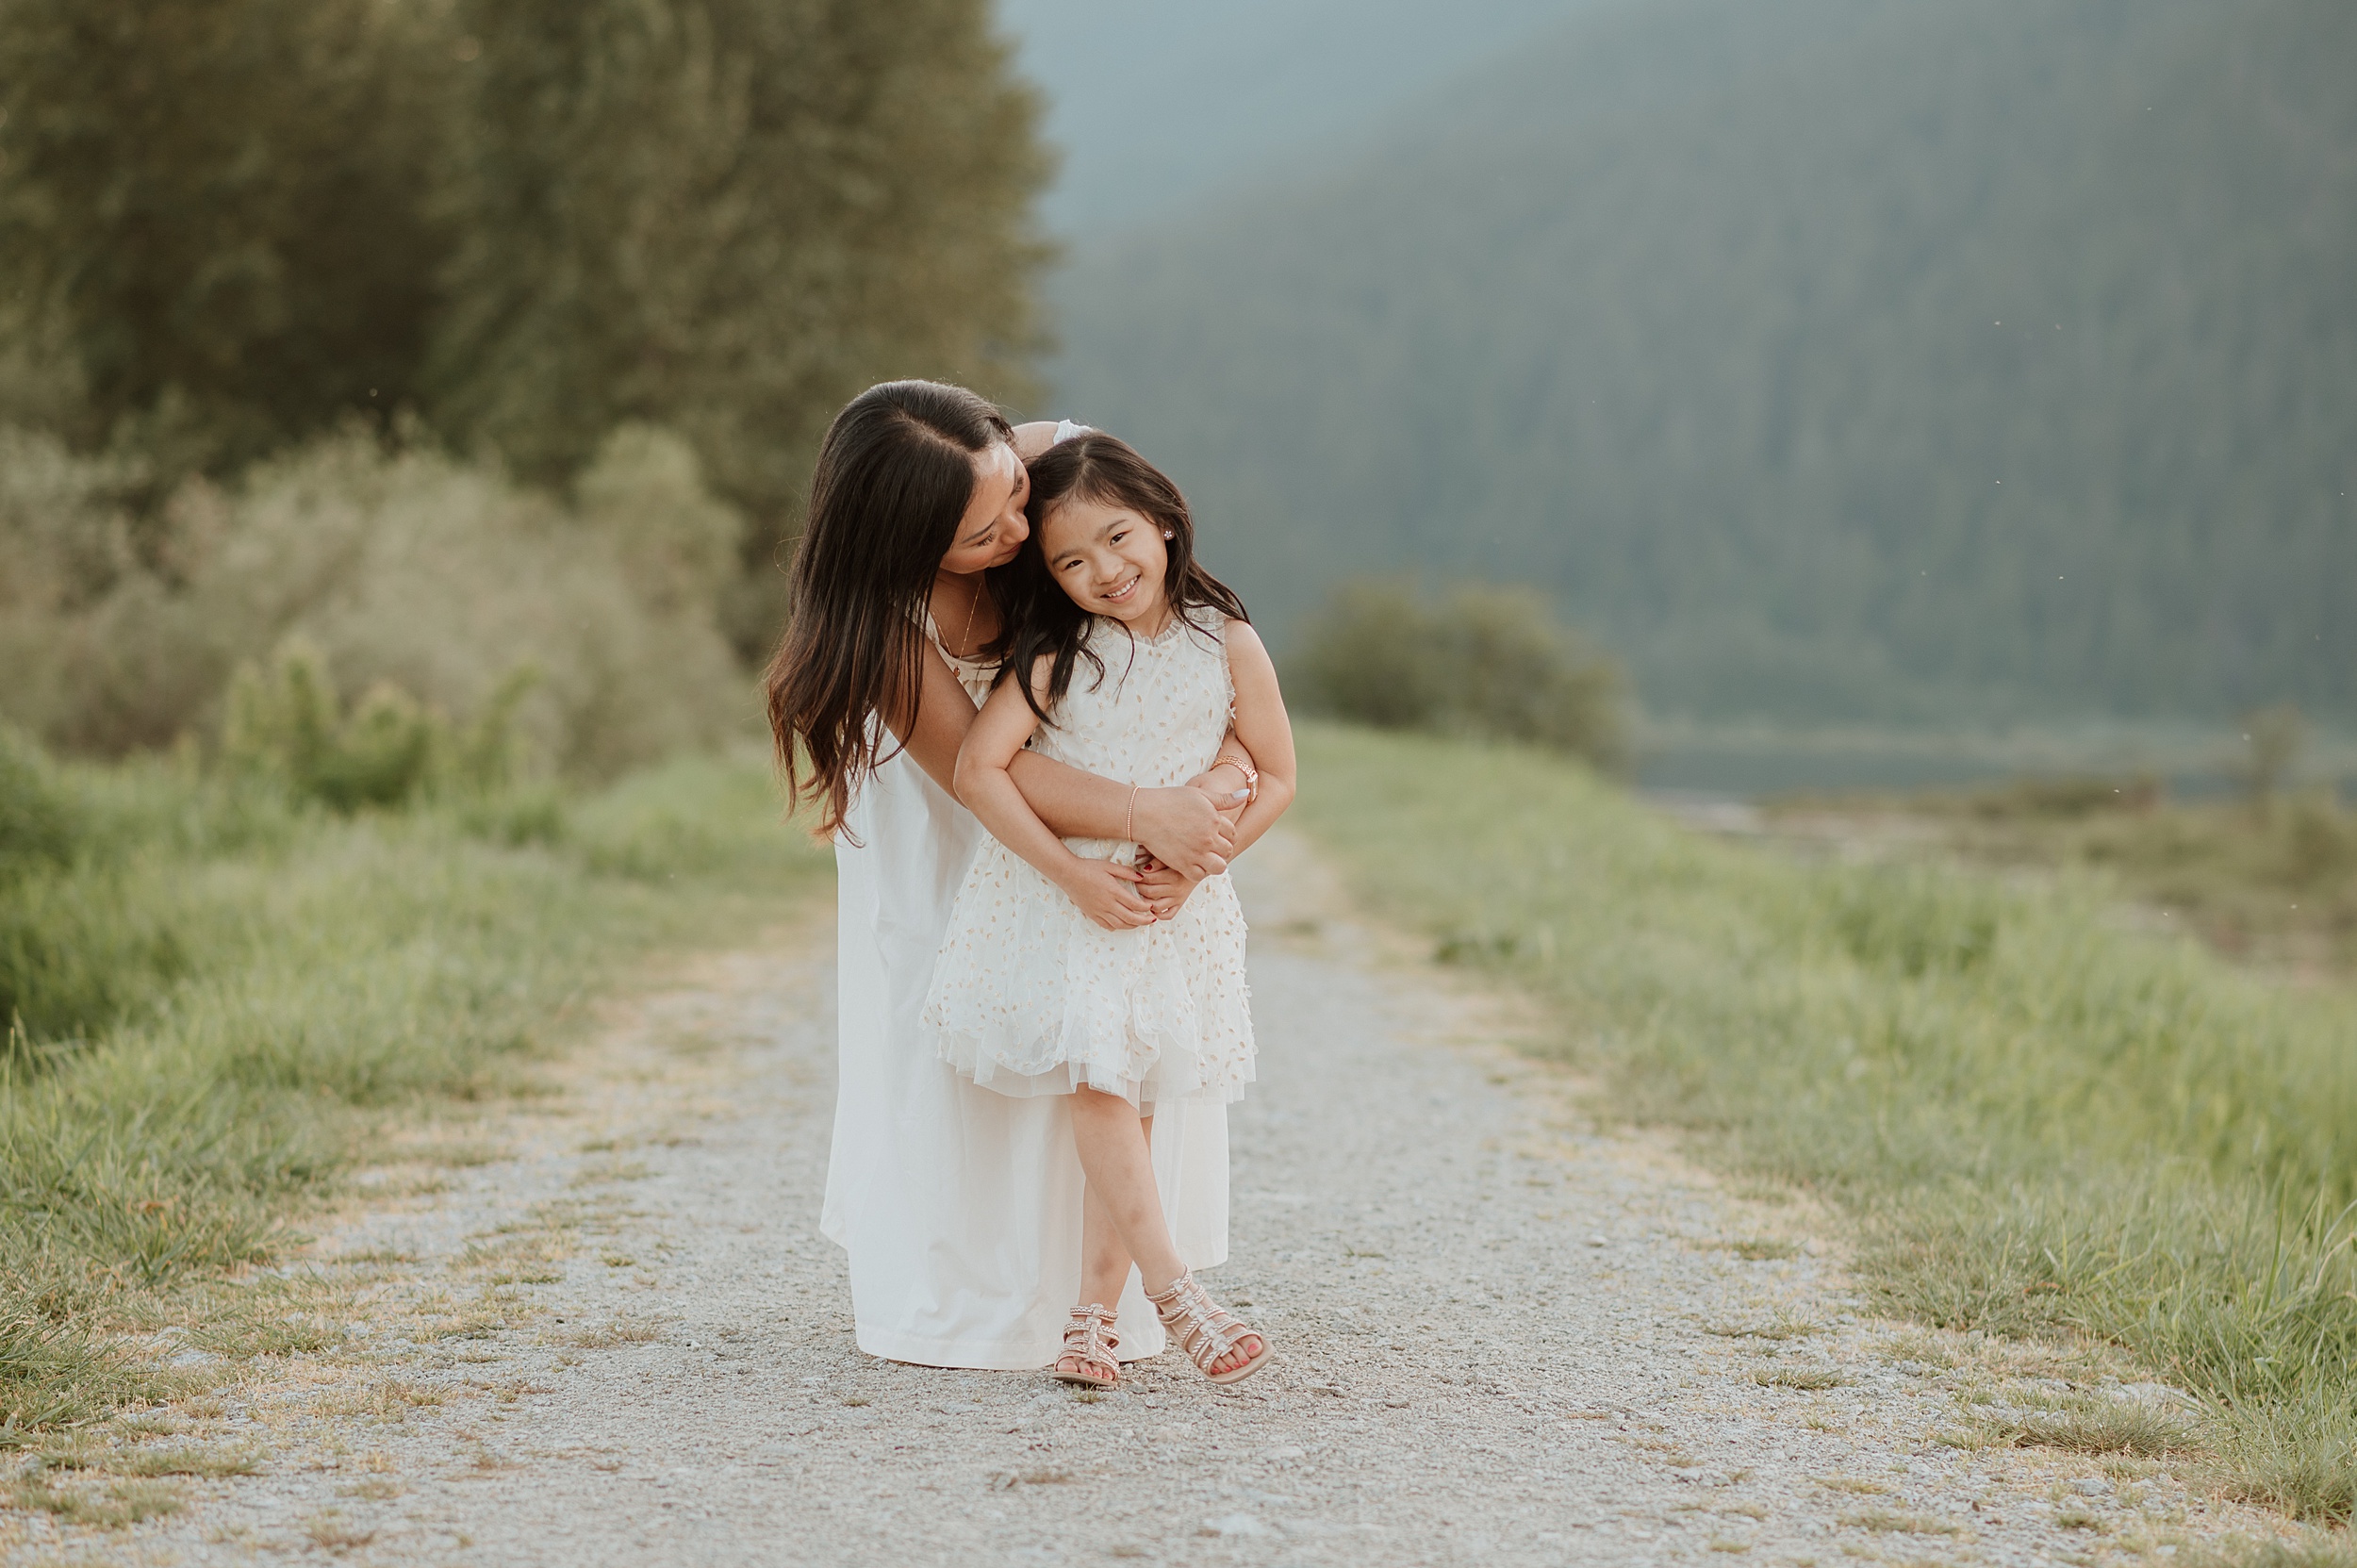 A mother in a white dress hugs onto her toddler daughter as they stand in a park trail by a lake